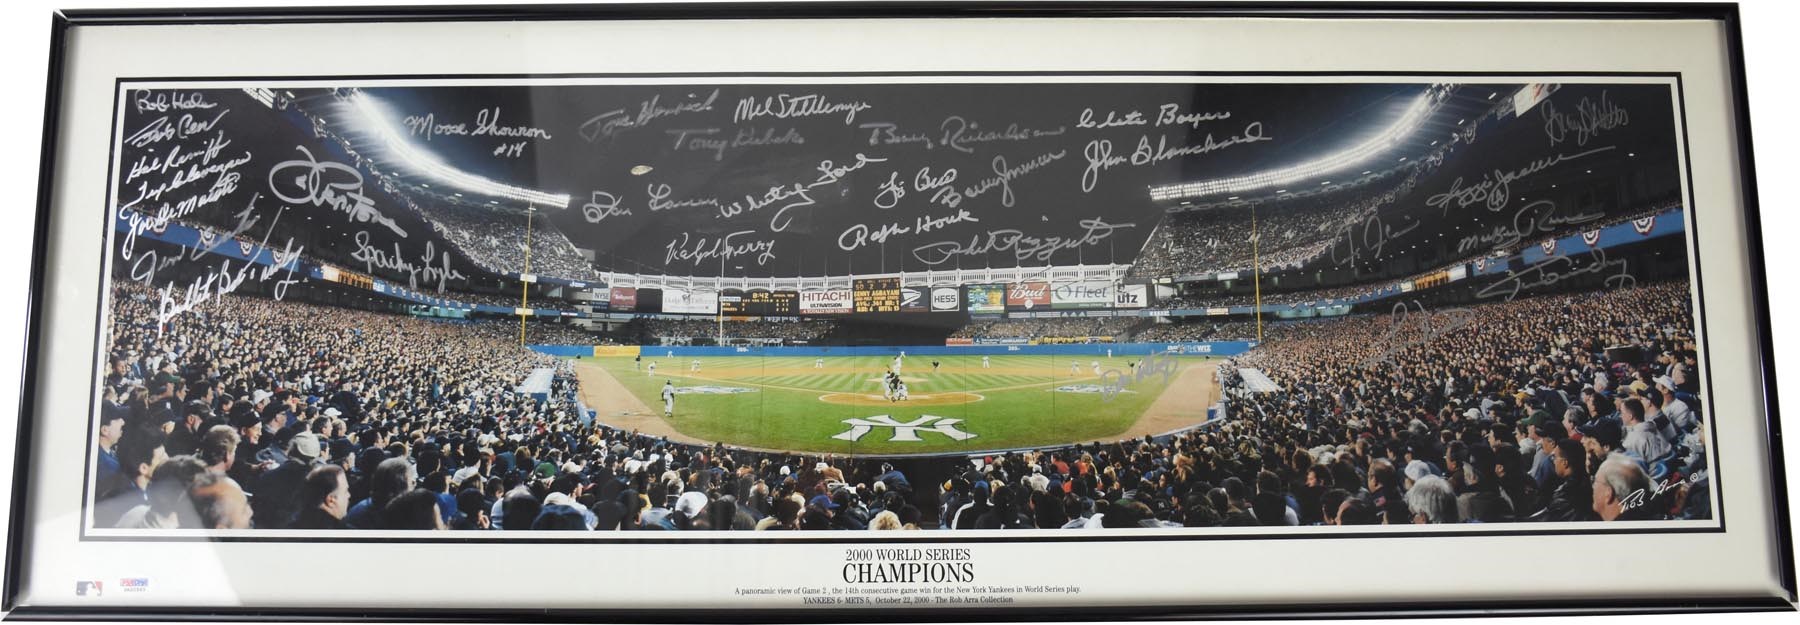 NY Yankees, Giants & Mets - New York Yankee Legends Signed Panorama